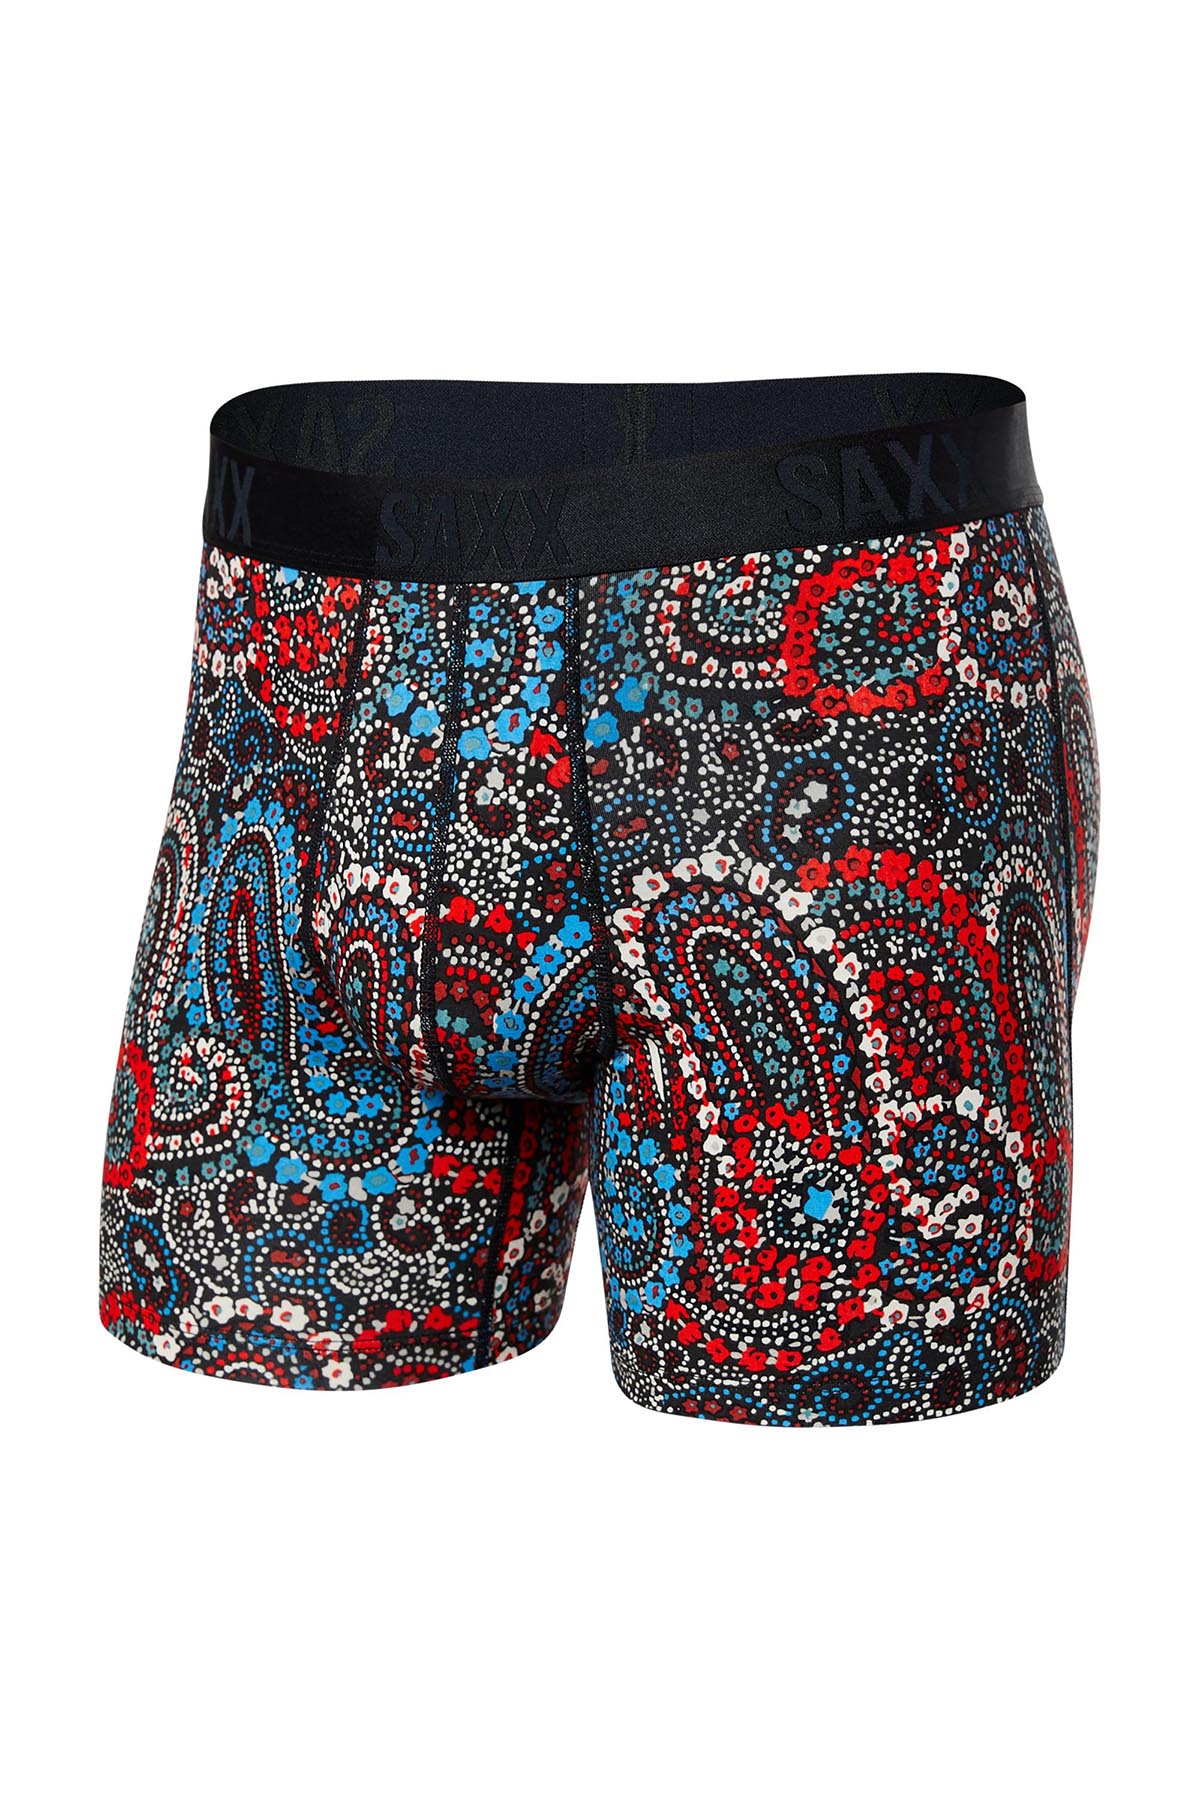 https://cdn11.bigcommerce.com/s-6ehfk/images/stencil/original/products/11775/34383/Saxx-22nd-Century-Silk-Boxer-Brief-Painted-Paisley-SXBB67-PPM-F__12566.1682803161.jpg?c=2?c=2&imbypass=on&imbypass=on